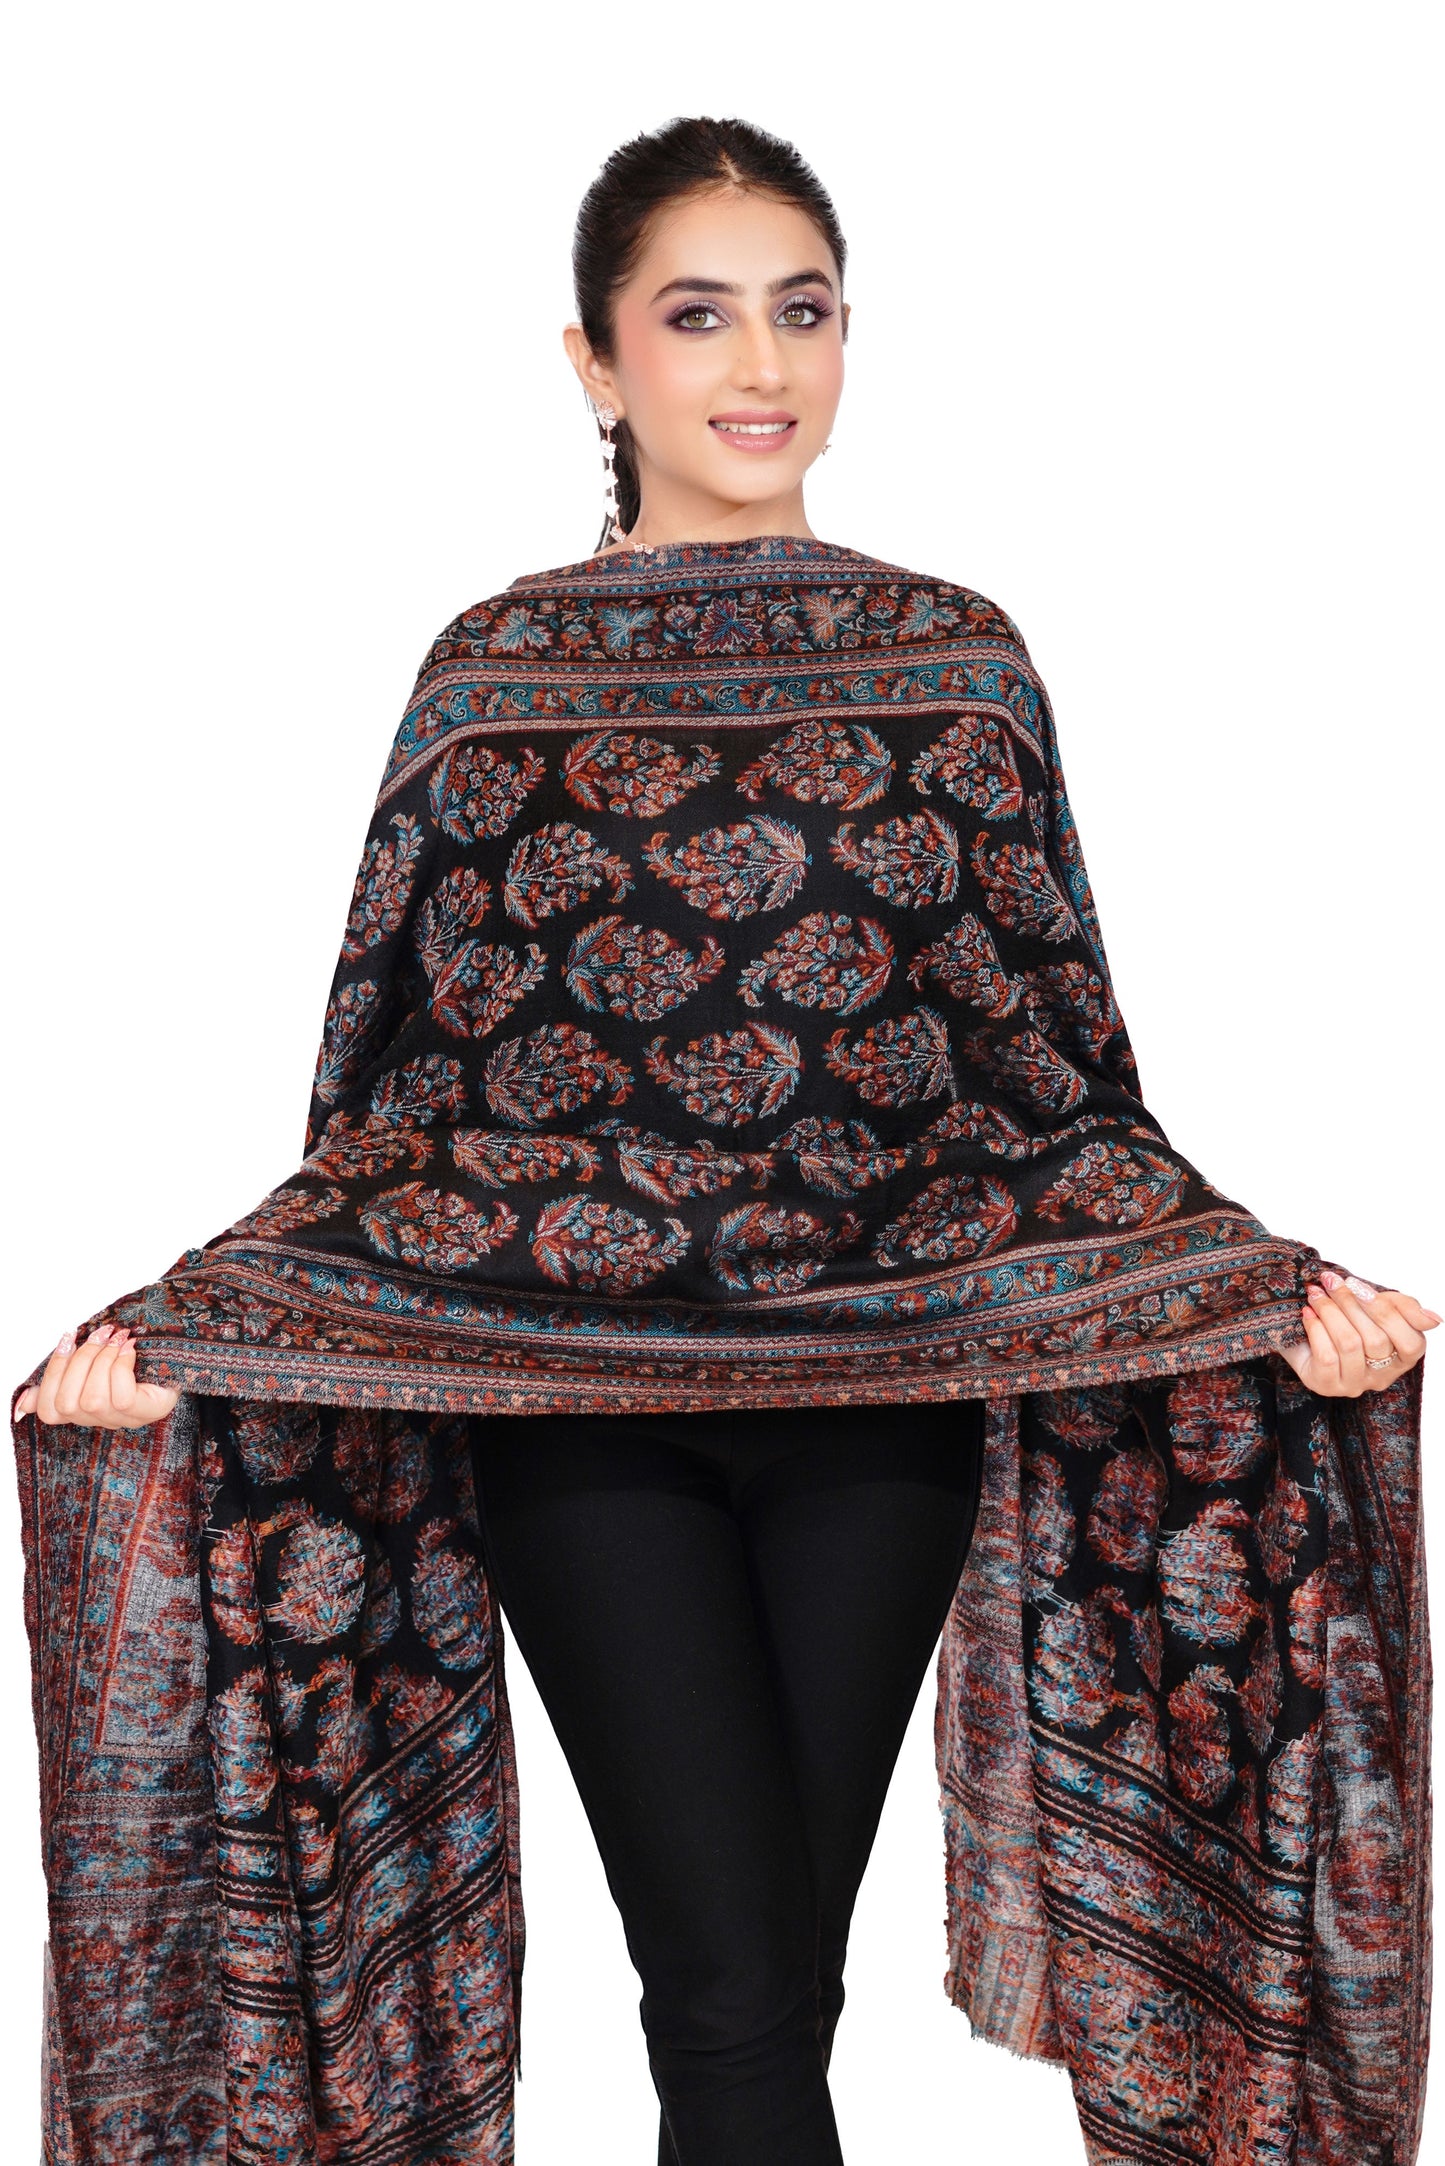 Women's Wool Blend Antique Shawl with Booti Design - Black Beauty